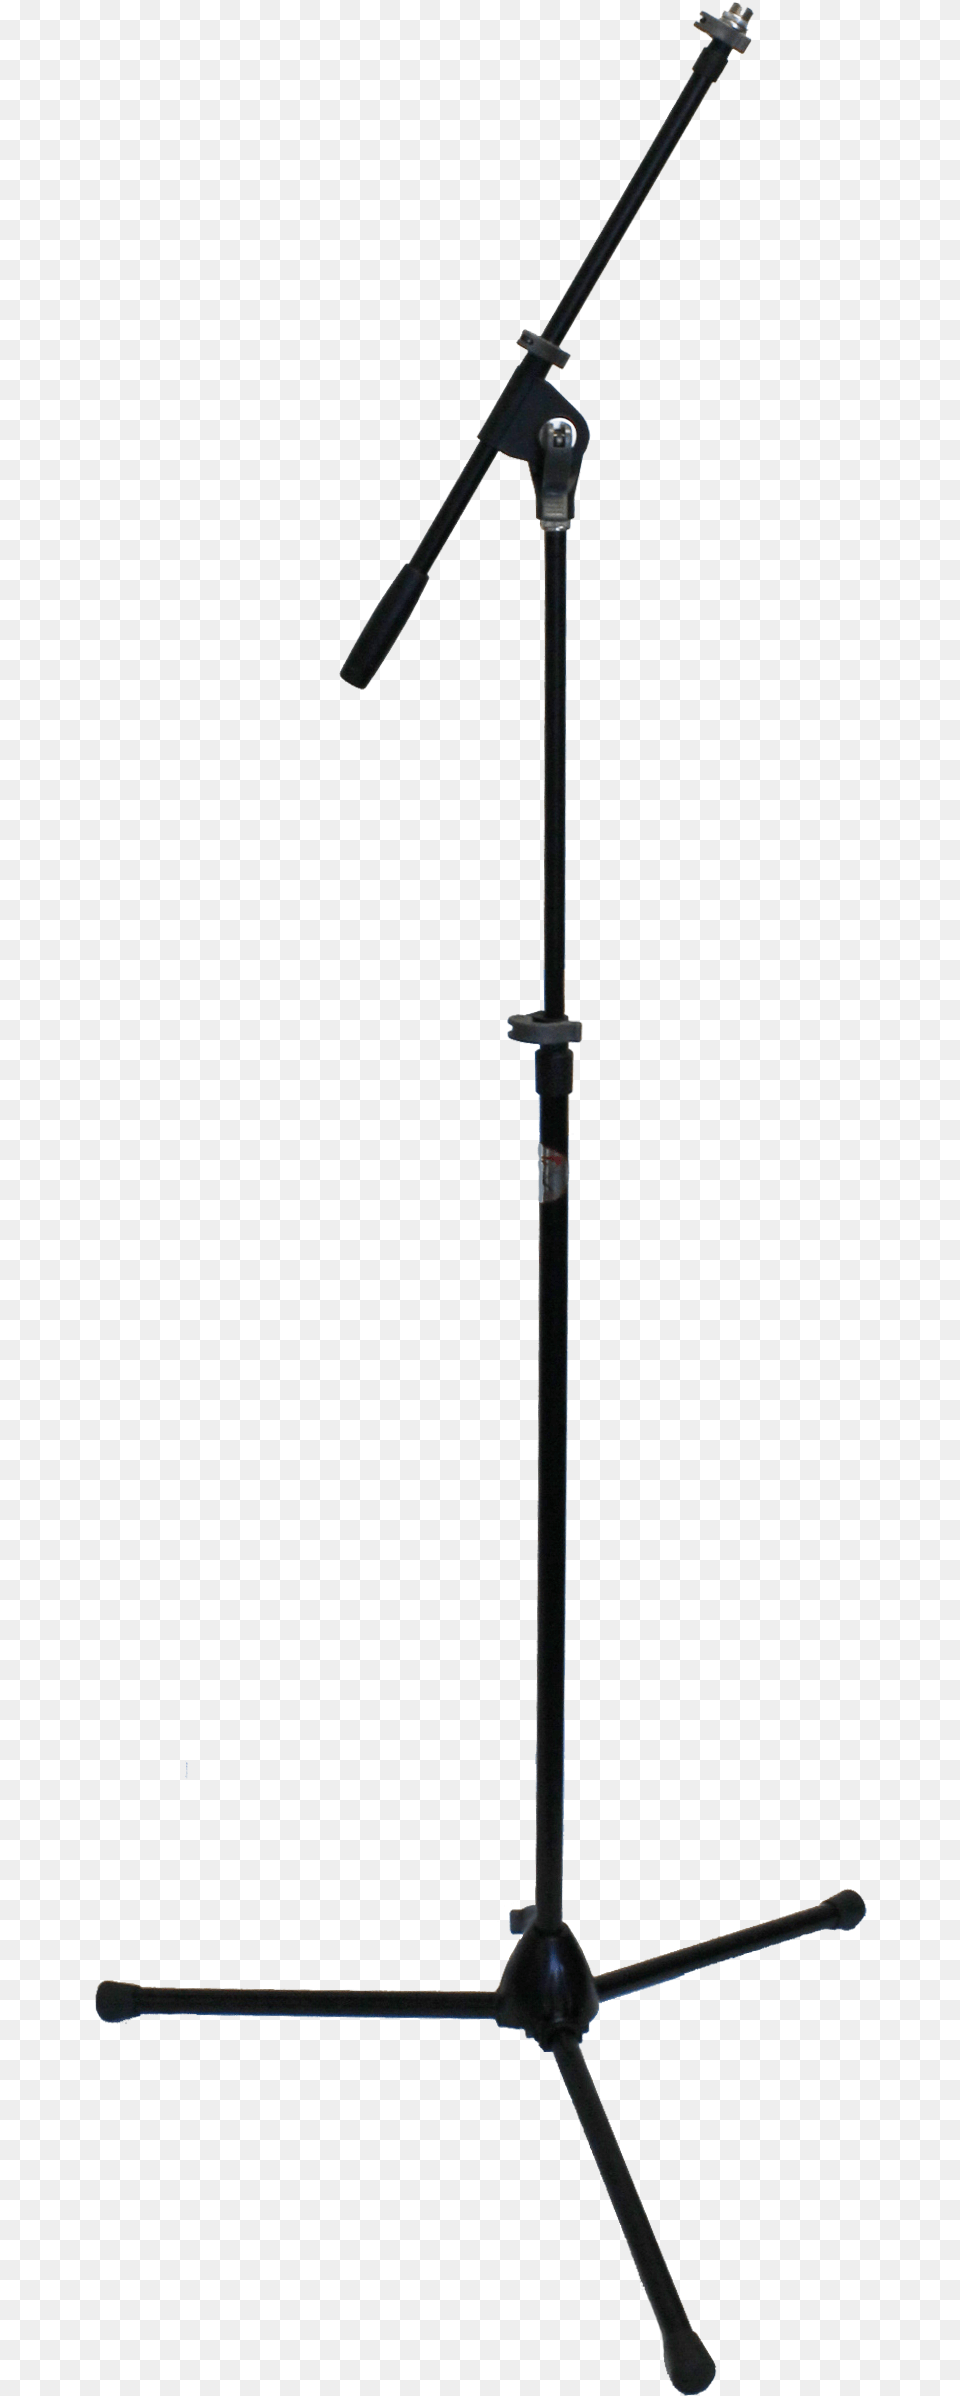 Mic Stand Transparent Background Boom Mic Stand, Electrical Device, Microphone, Tripod, Furniture Png Image